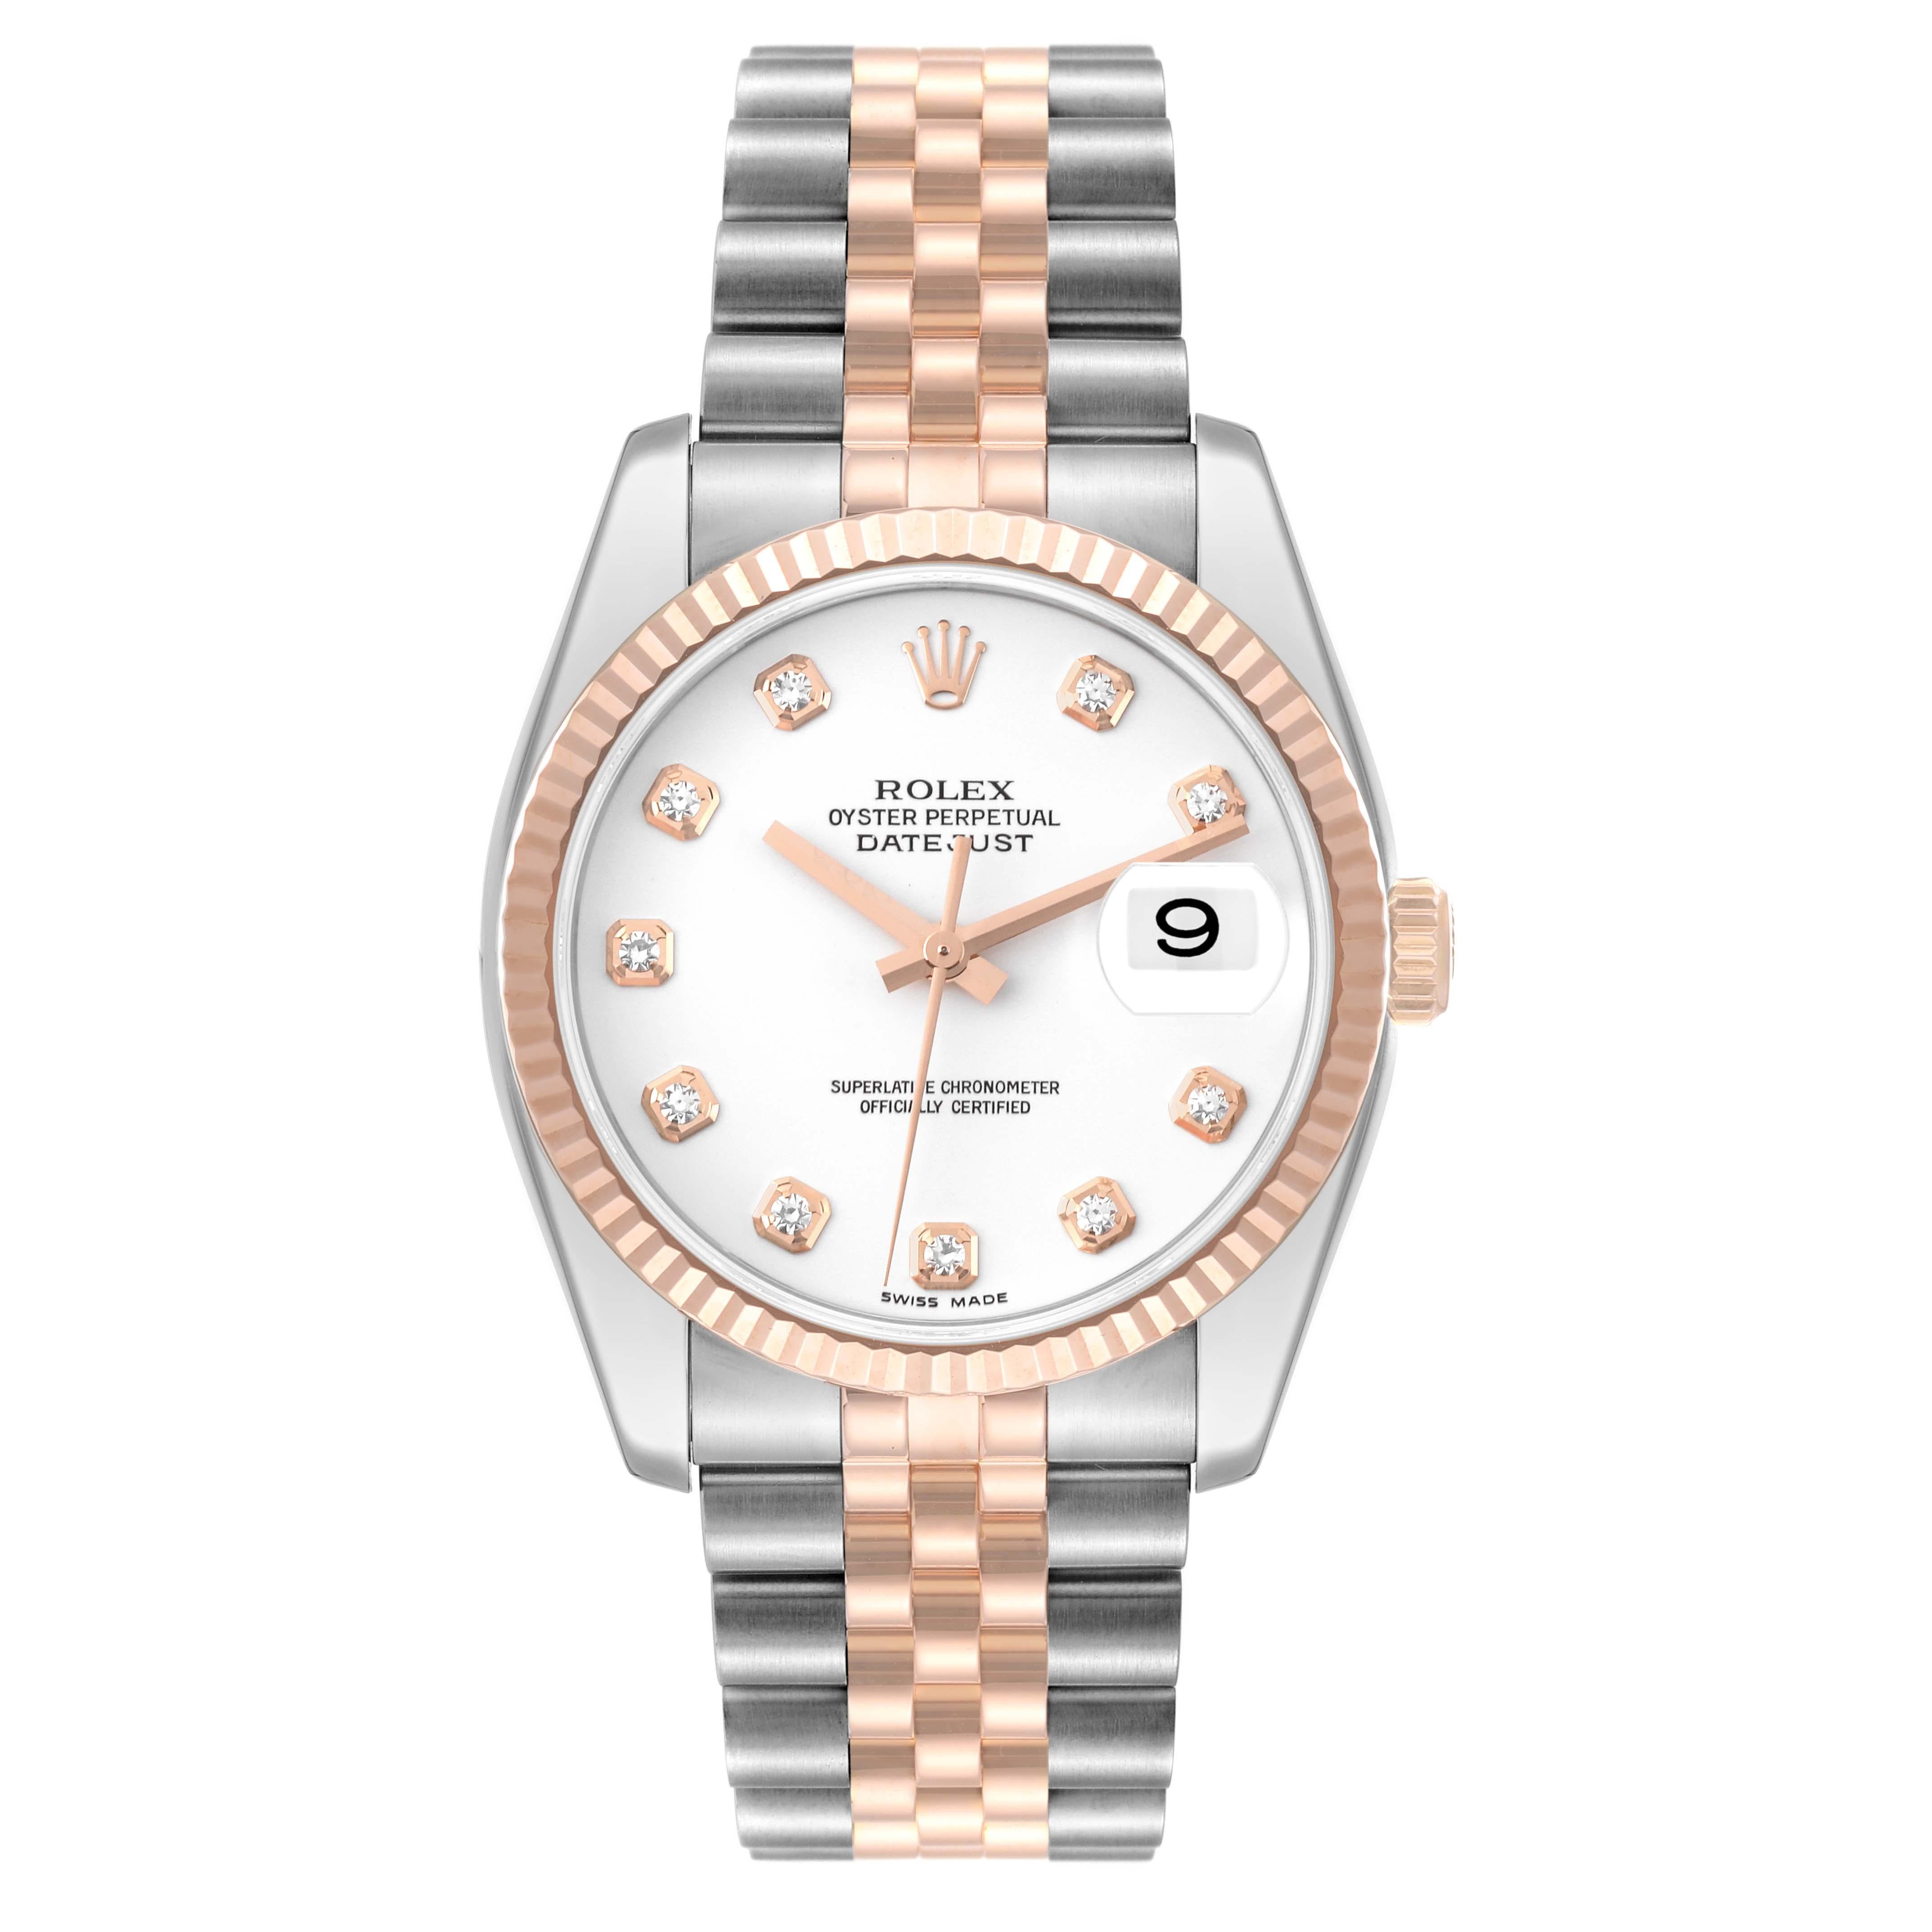 Rolex Datejust Steel Rose Gold White Diamond Dial Mens Watch 116231. Officially certified chronometer automatic self-winding movement. Stainless steel and Everose gold case 36mm in diameter. Rolex logo on an 18K Everose gold crown. 18k rose gold